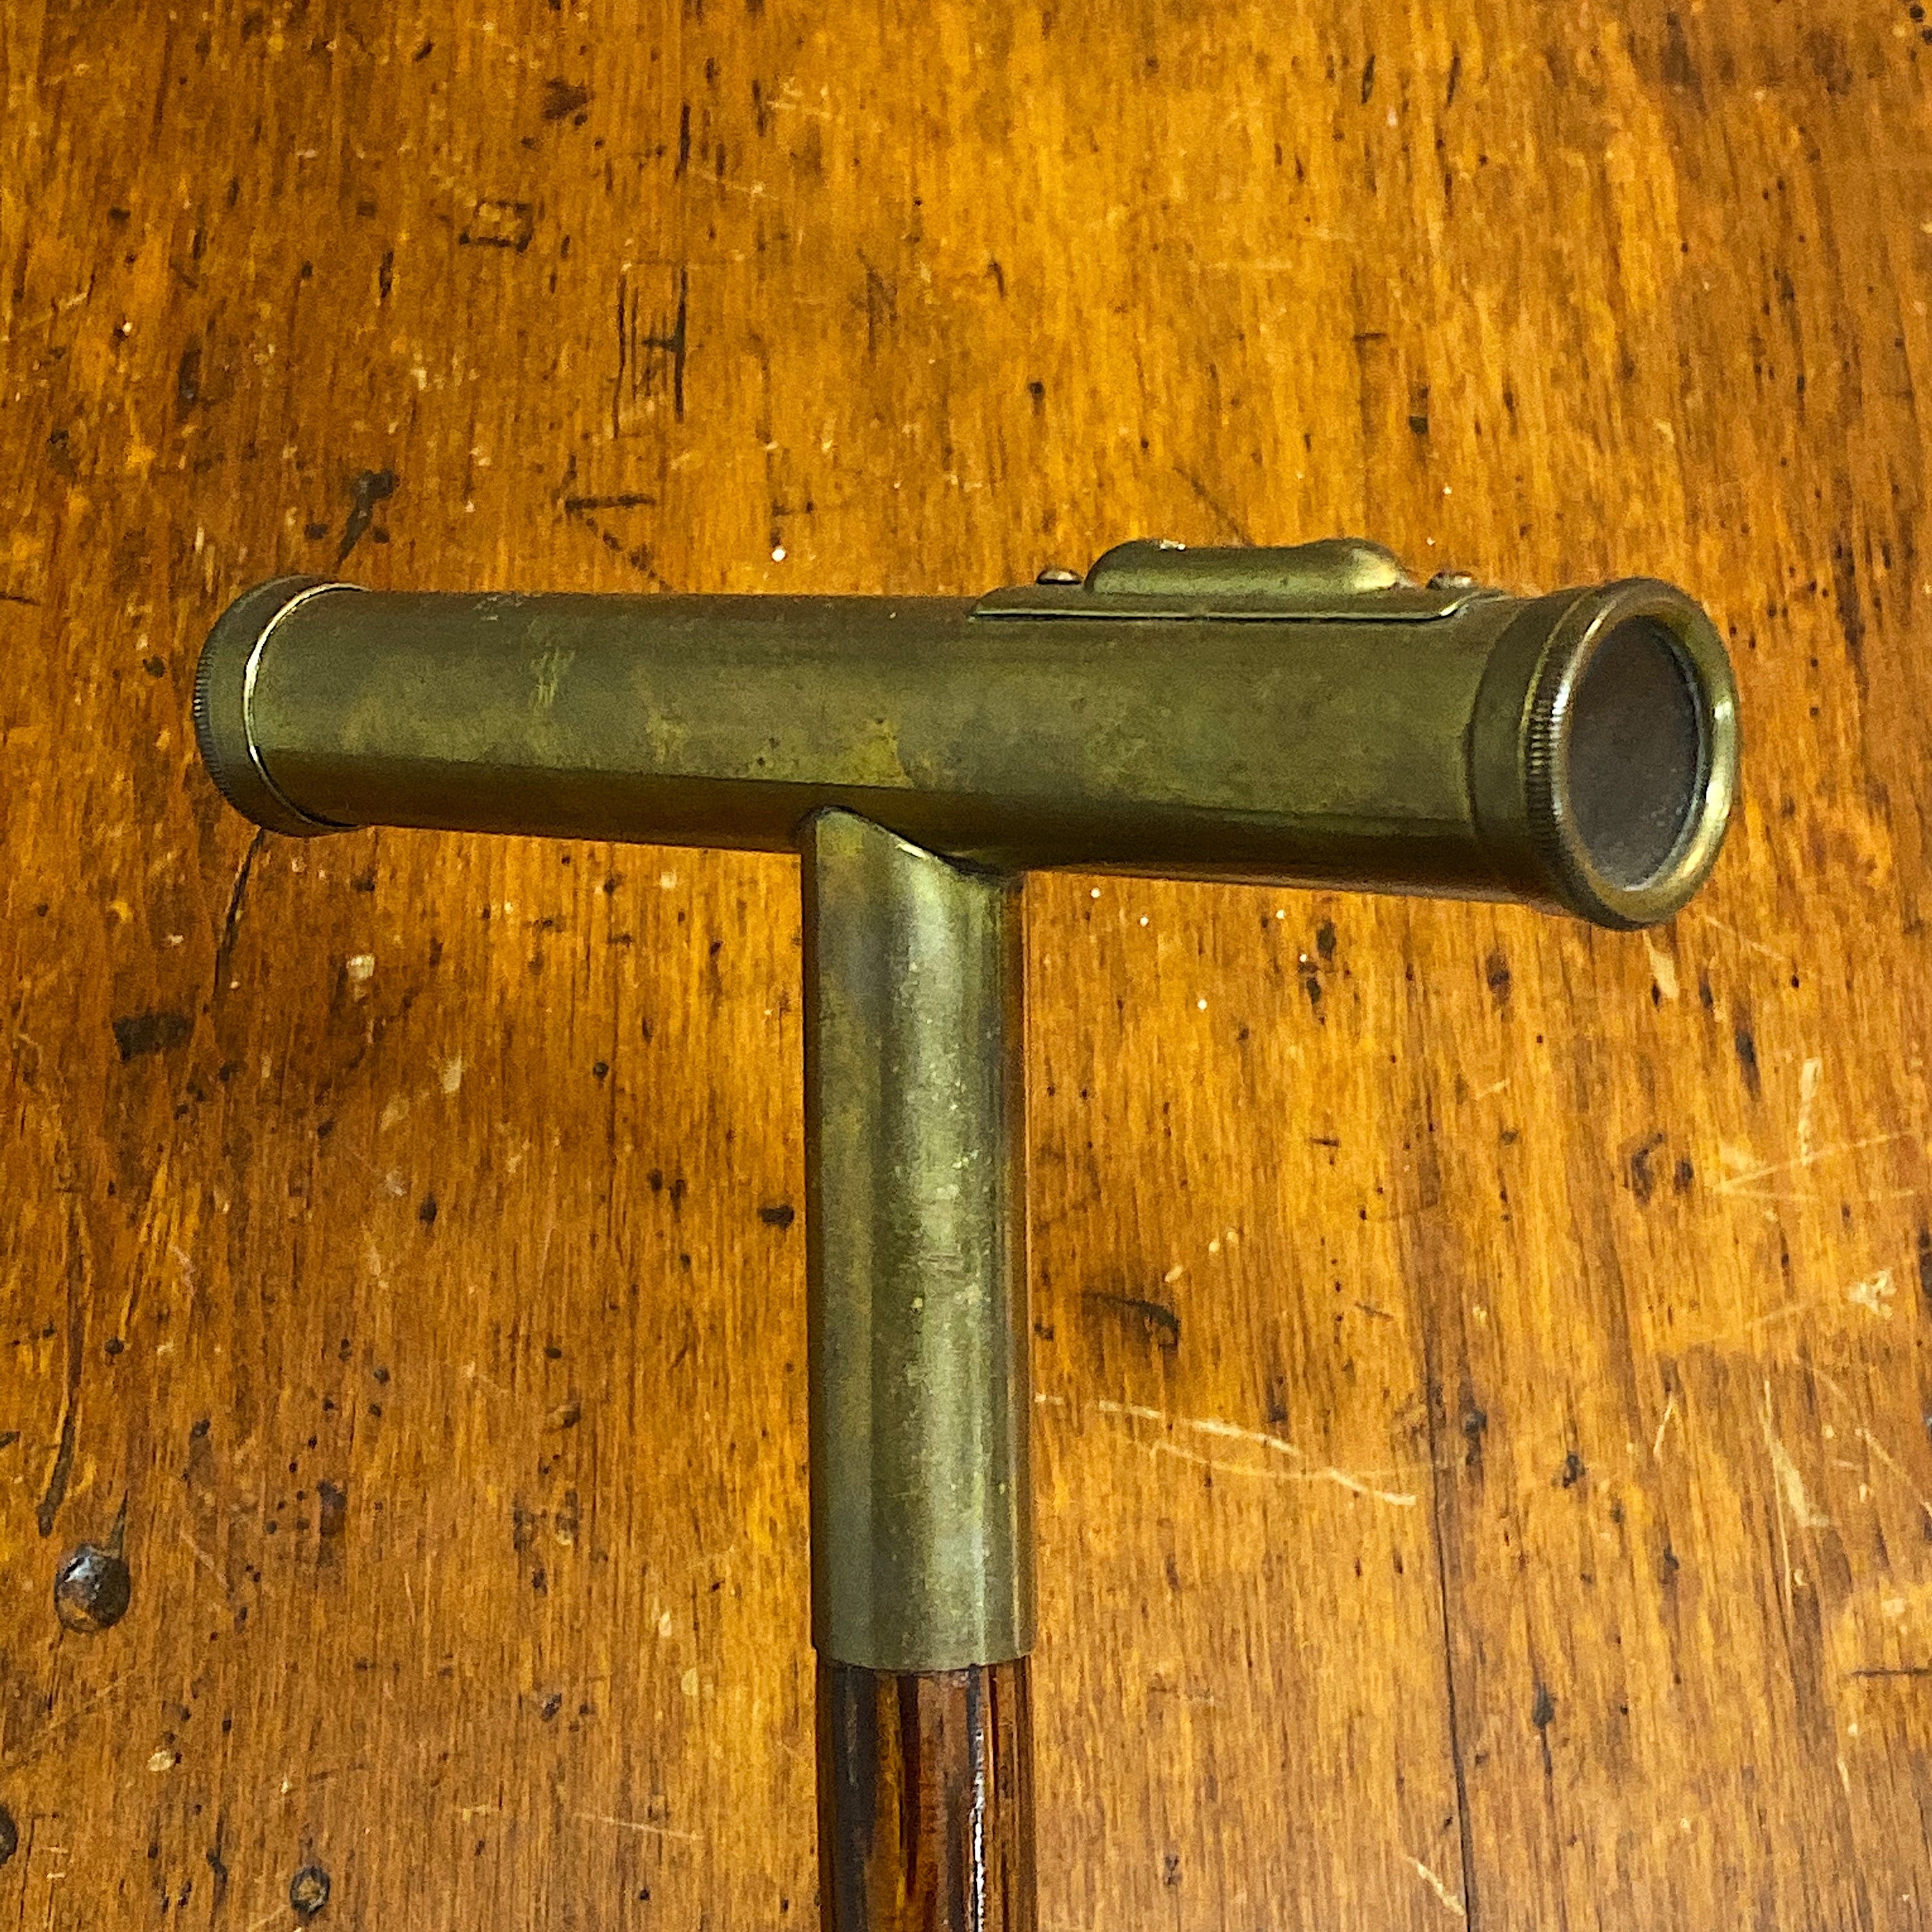 Antique Dietzgen Survey Gadget Cane - Early 1900s - Level System Cane - Rare Brass Walking Stick - Vintage Architectural Collectible Made in USA